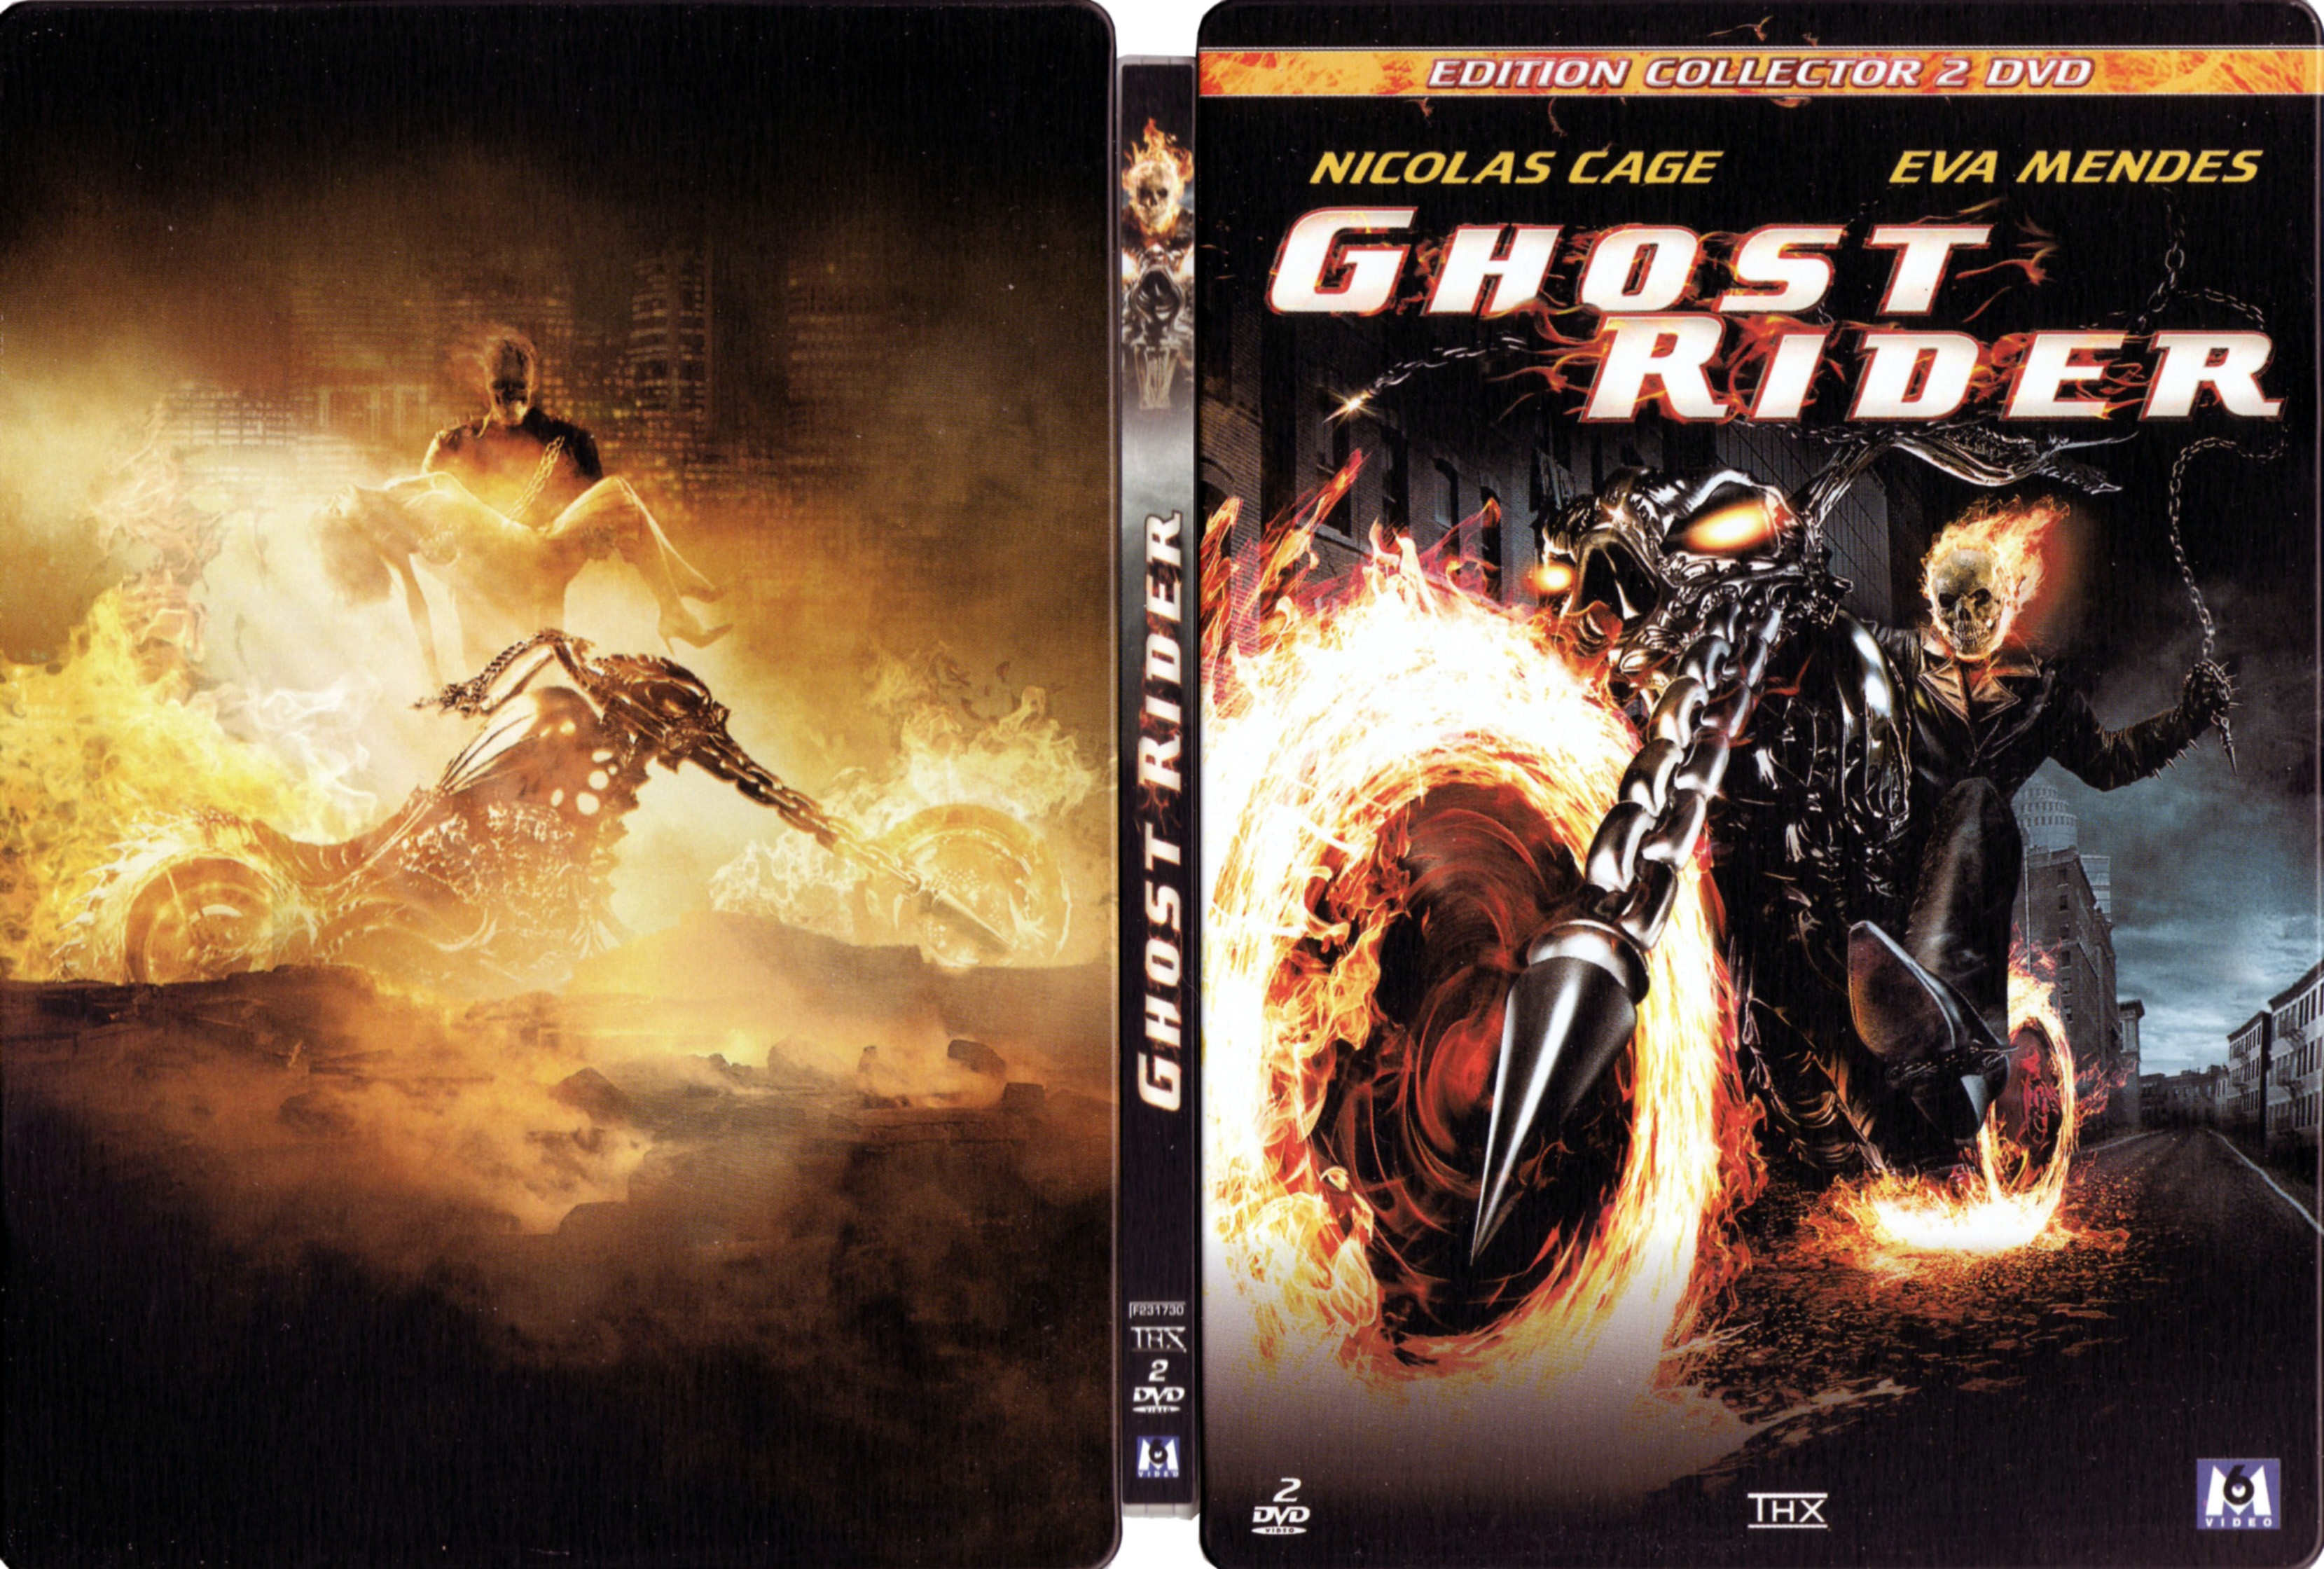 Jaquette DVD Ghost rider v2